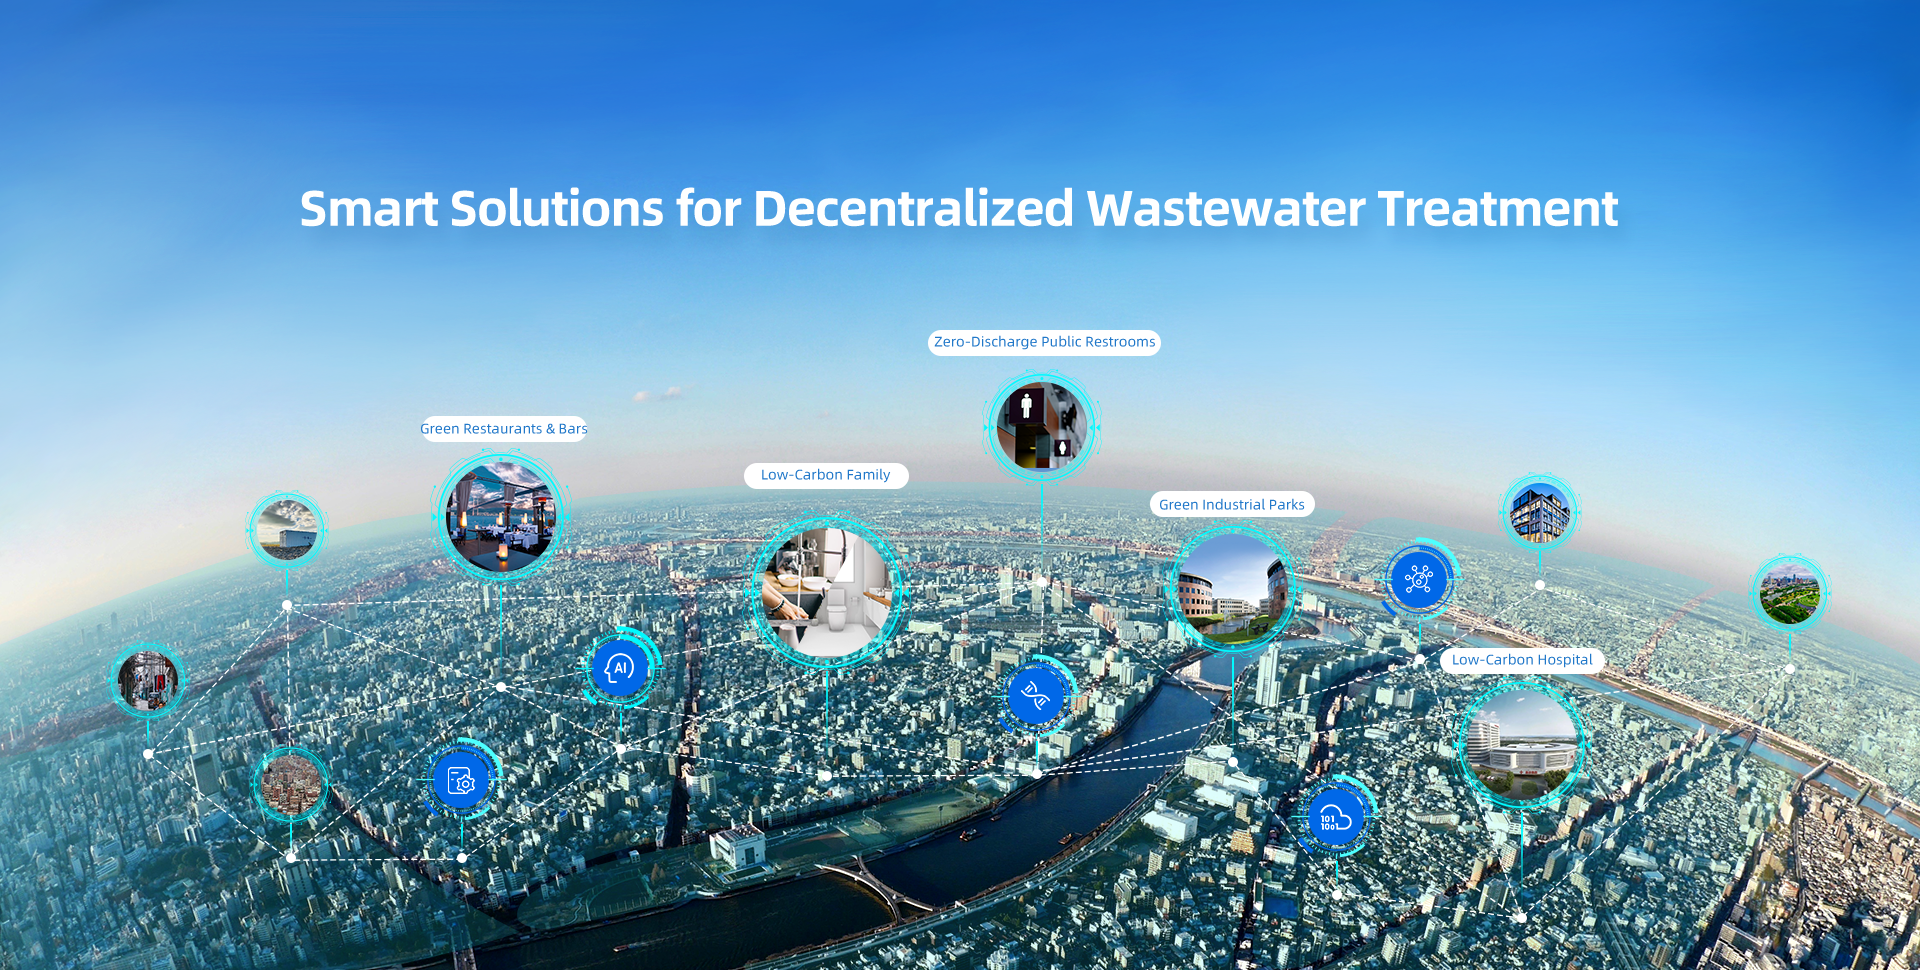 Smart Solutions for Decentralized Wastewater Treatment